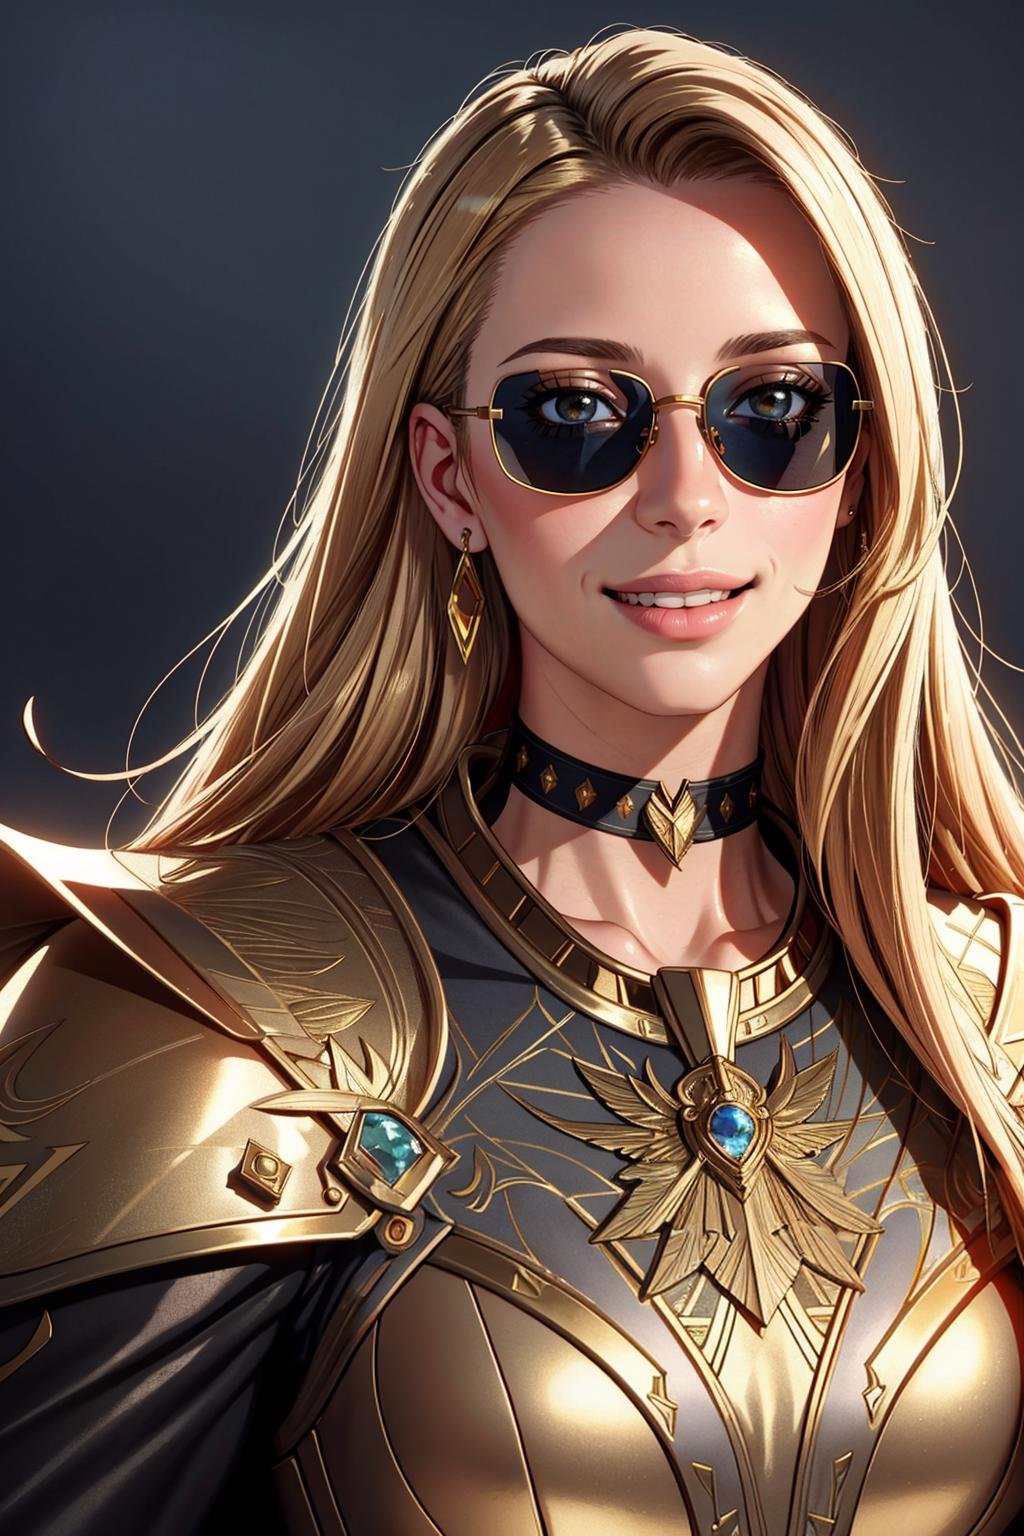 ((Masterpiece, best quality,edgQuality)),smiling,excited,edgGolden, a woman dressed in golden armor ,wearing edgGoldenBlonde Nadia with (sunglasses and a choker)<lora:Ultimate_Nadia:0.5> <lora:edgNadiaGolden:0.8>